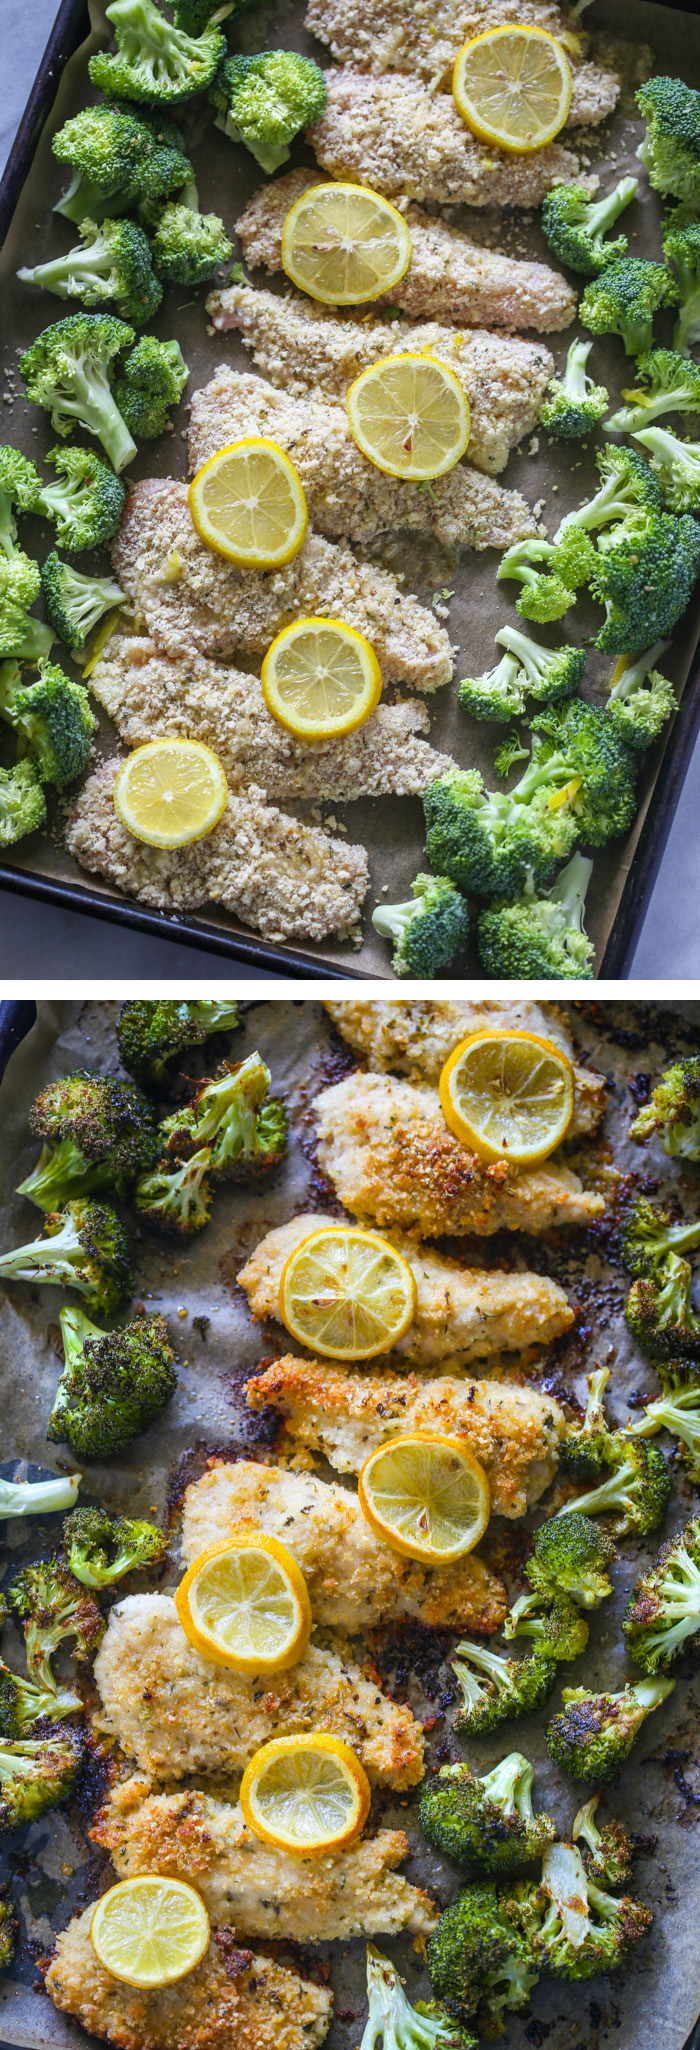 20 Minute One Pan Lemon Parmesan Chicken and Broccoli